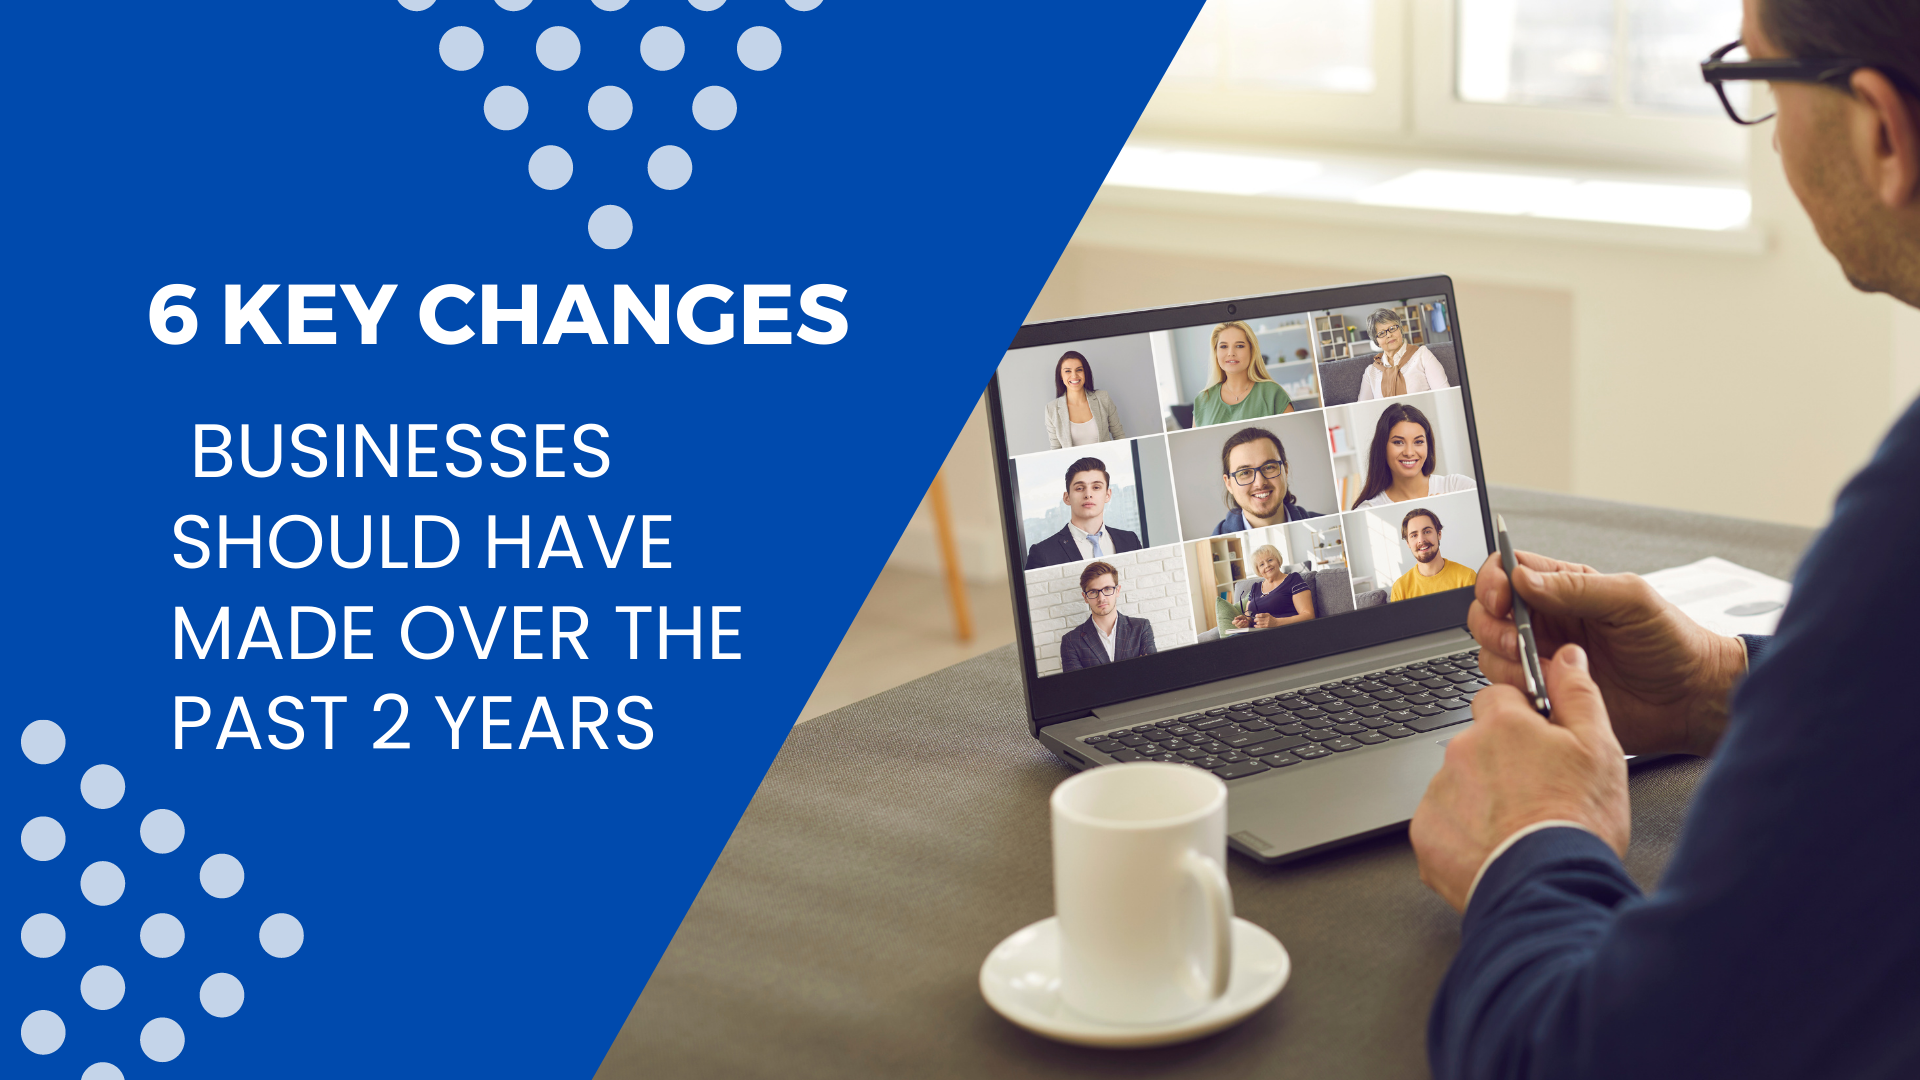 6 key changes businesses should have made over the past 2 years